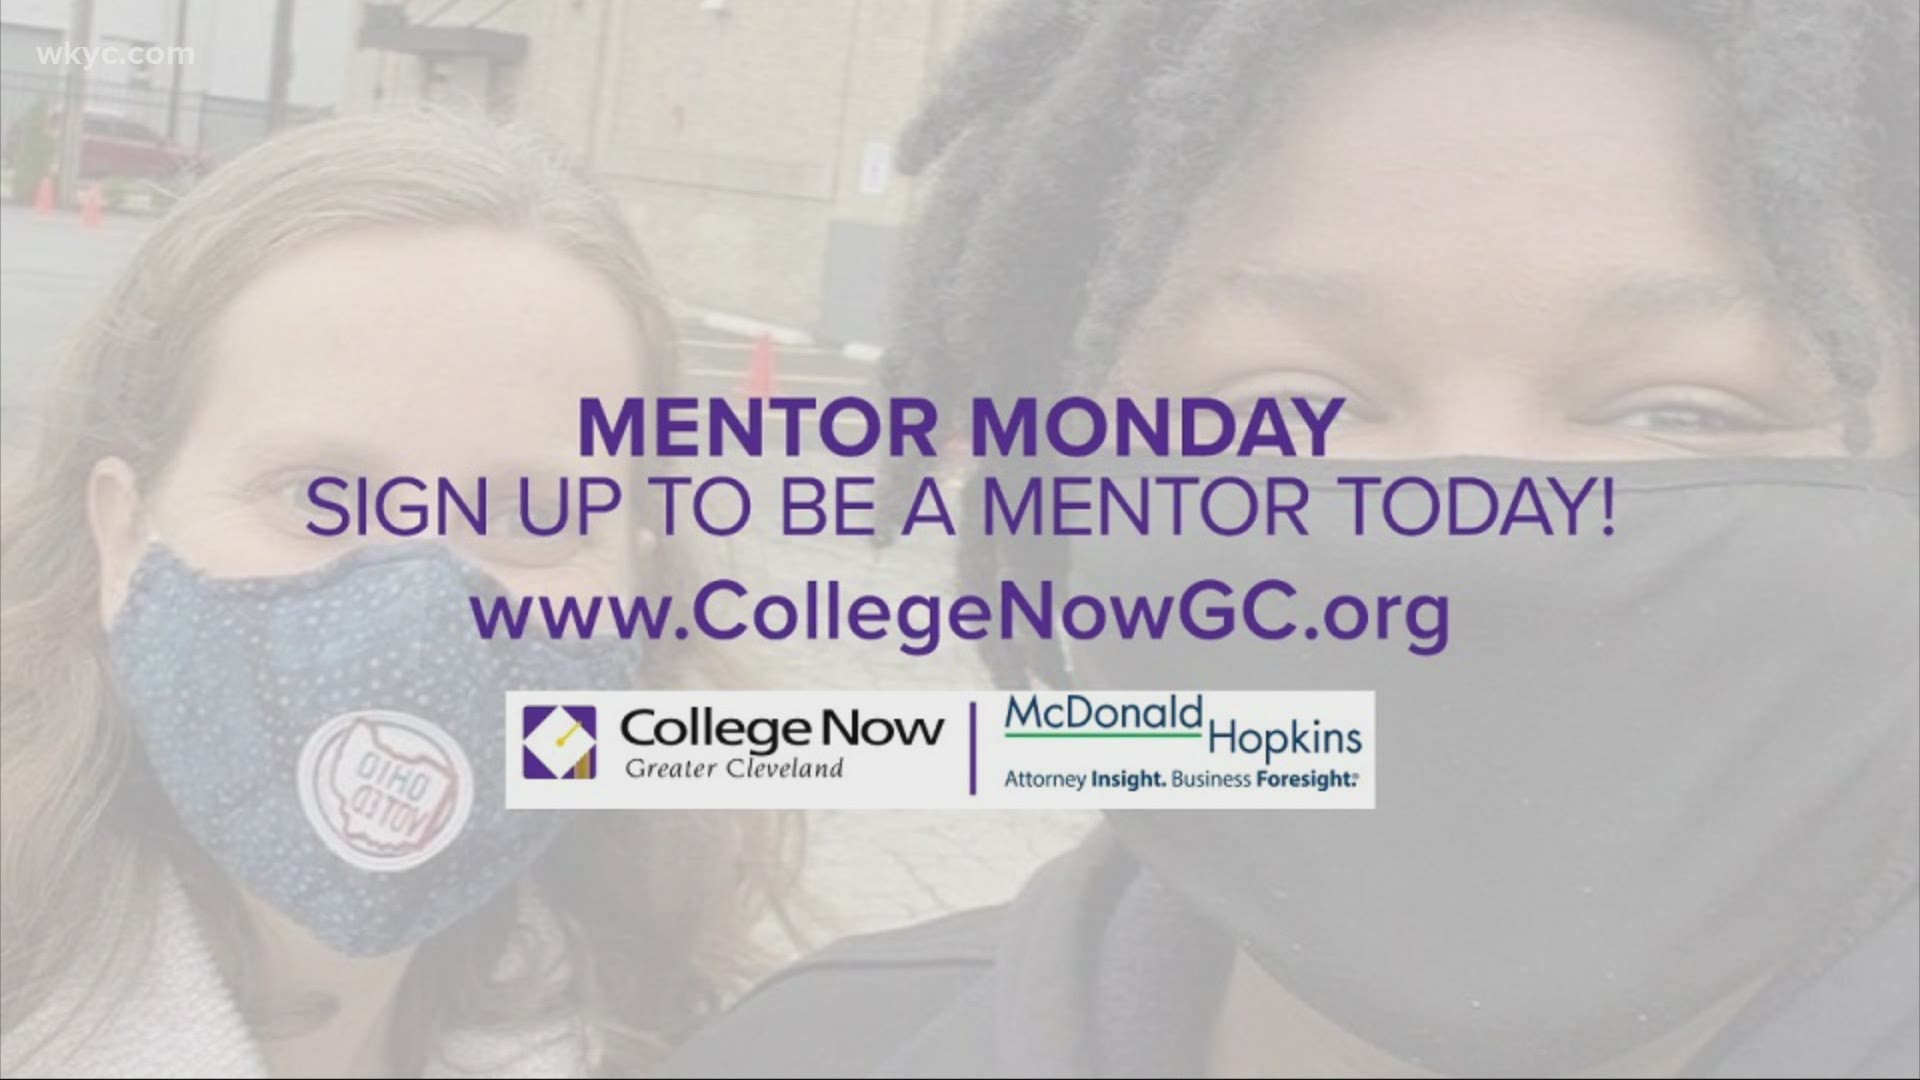 Today is Mentor Monday at WKYC Studios.  We are partnering with College Now Greater Cleveland to help recruit 100 mentors for local college-bound students.